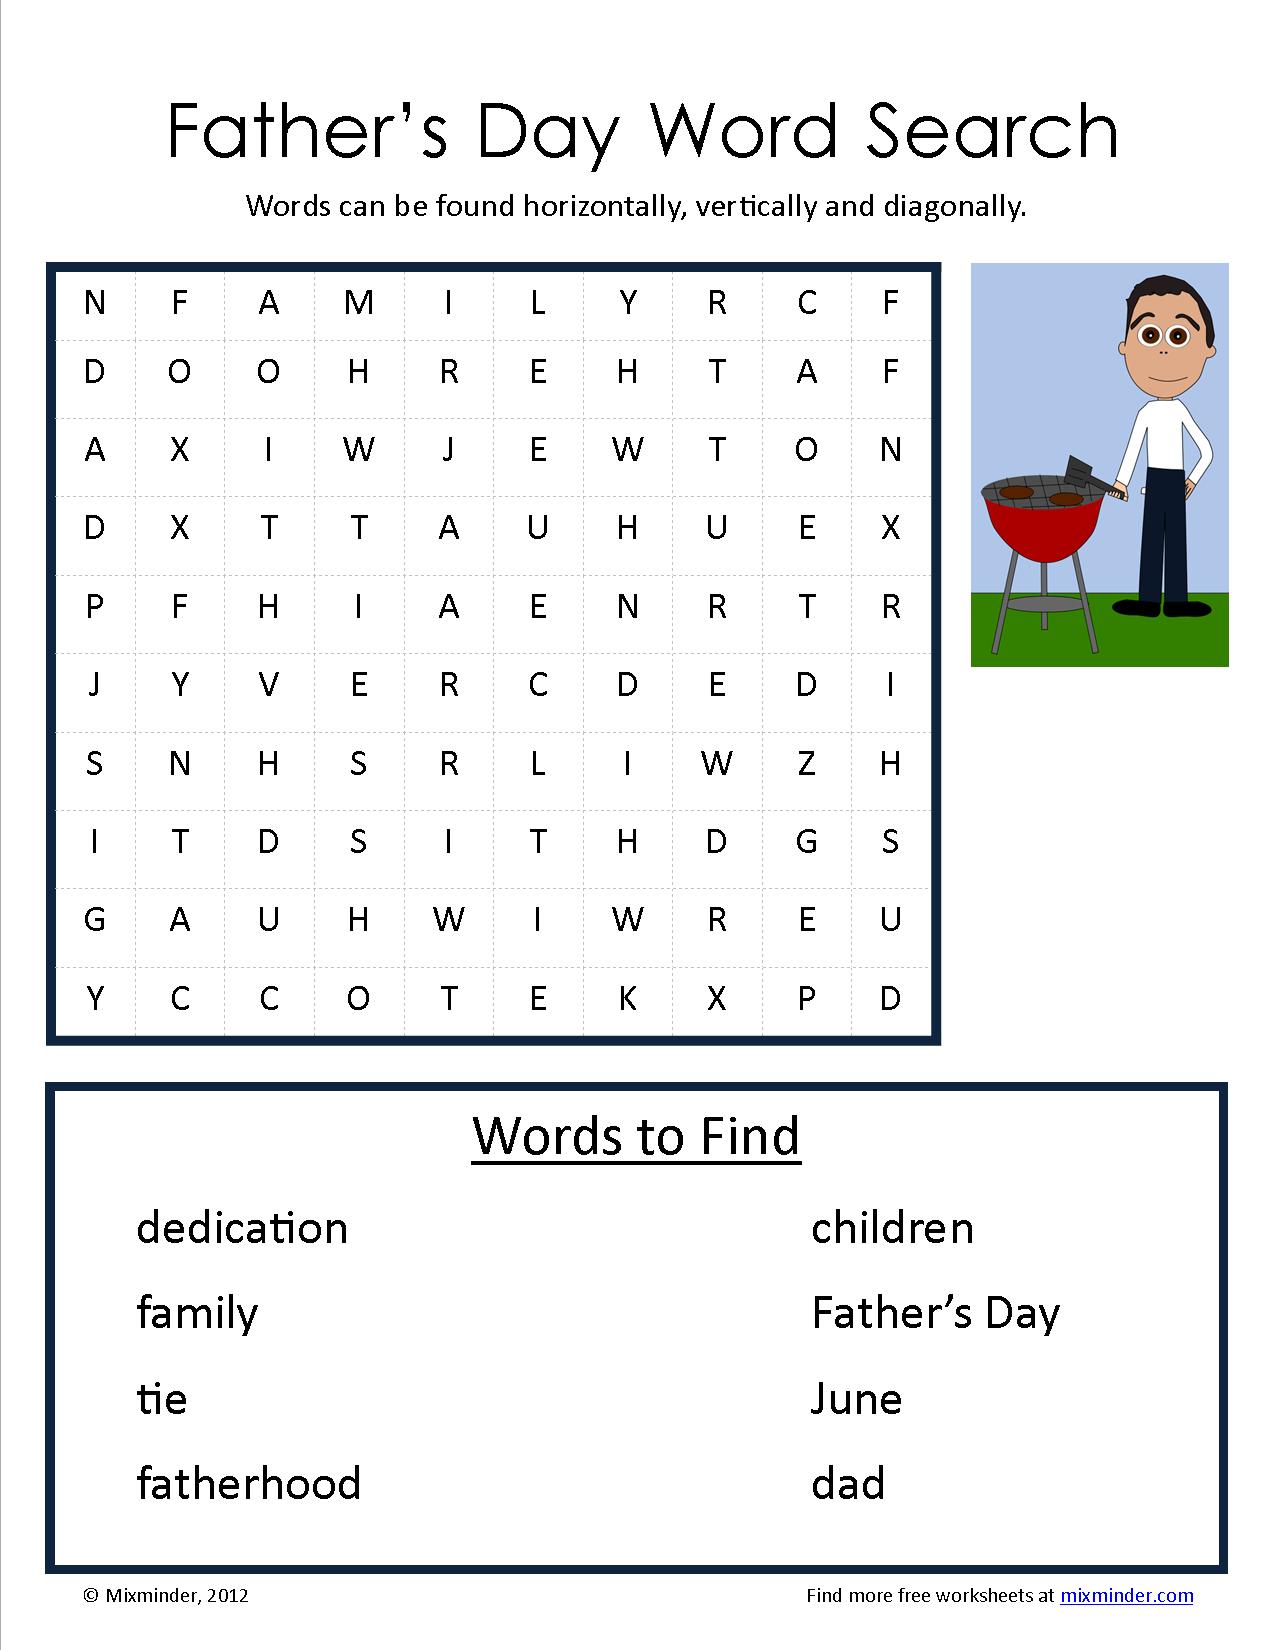 Father’s Day Word Search